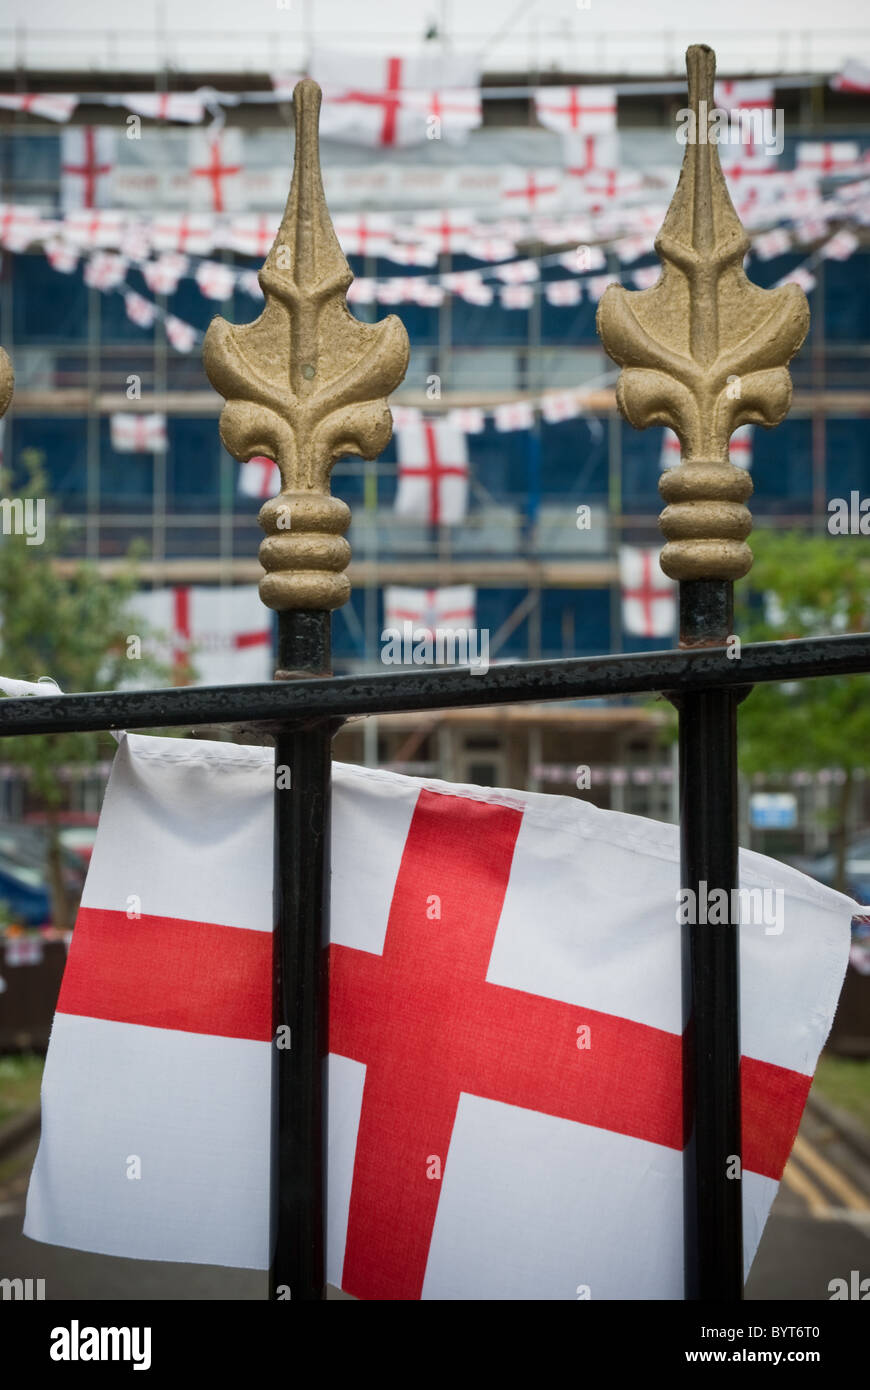 St George's Cross flag draped over a wrought iron gate to celebrate the 2010 World Cup. Stock Photo